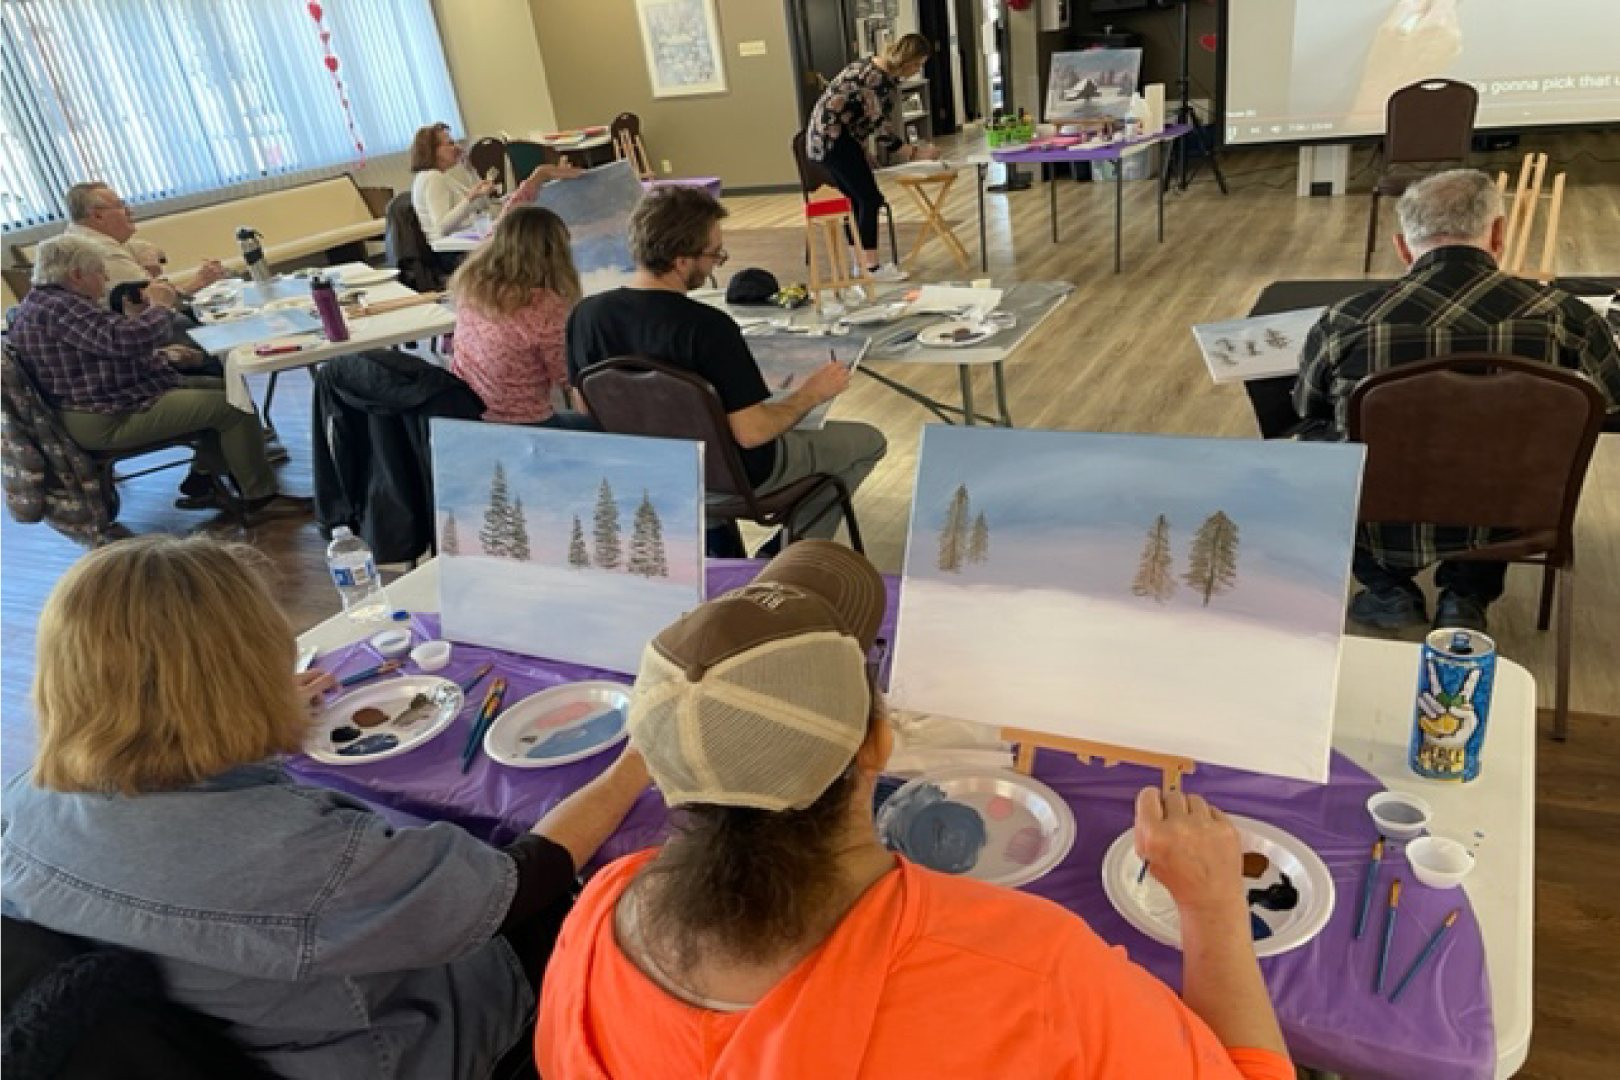 Picture of a group of people sitting at desks painting at the Senior Center